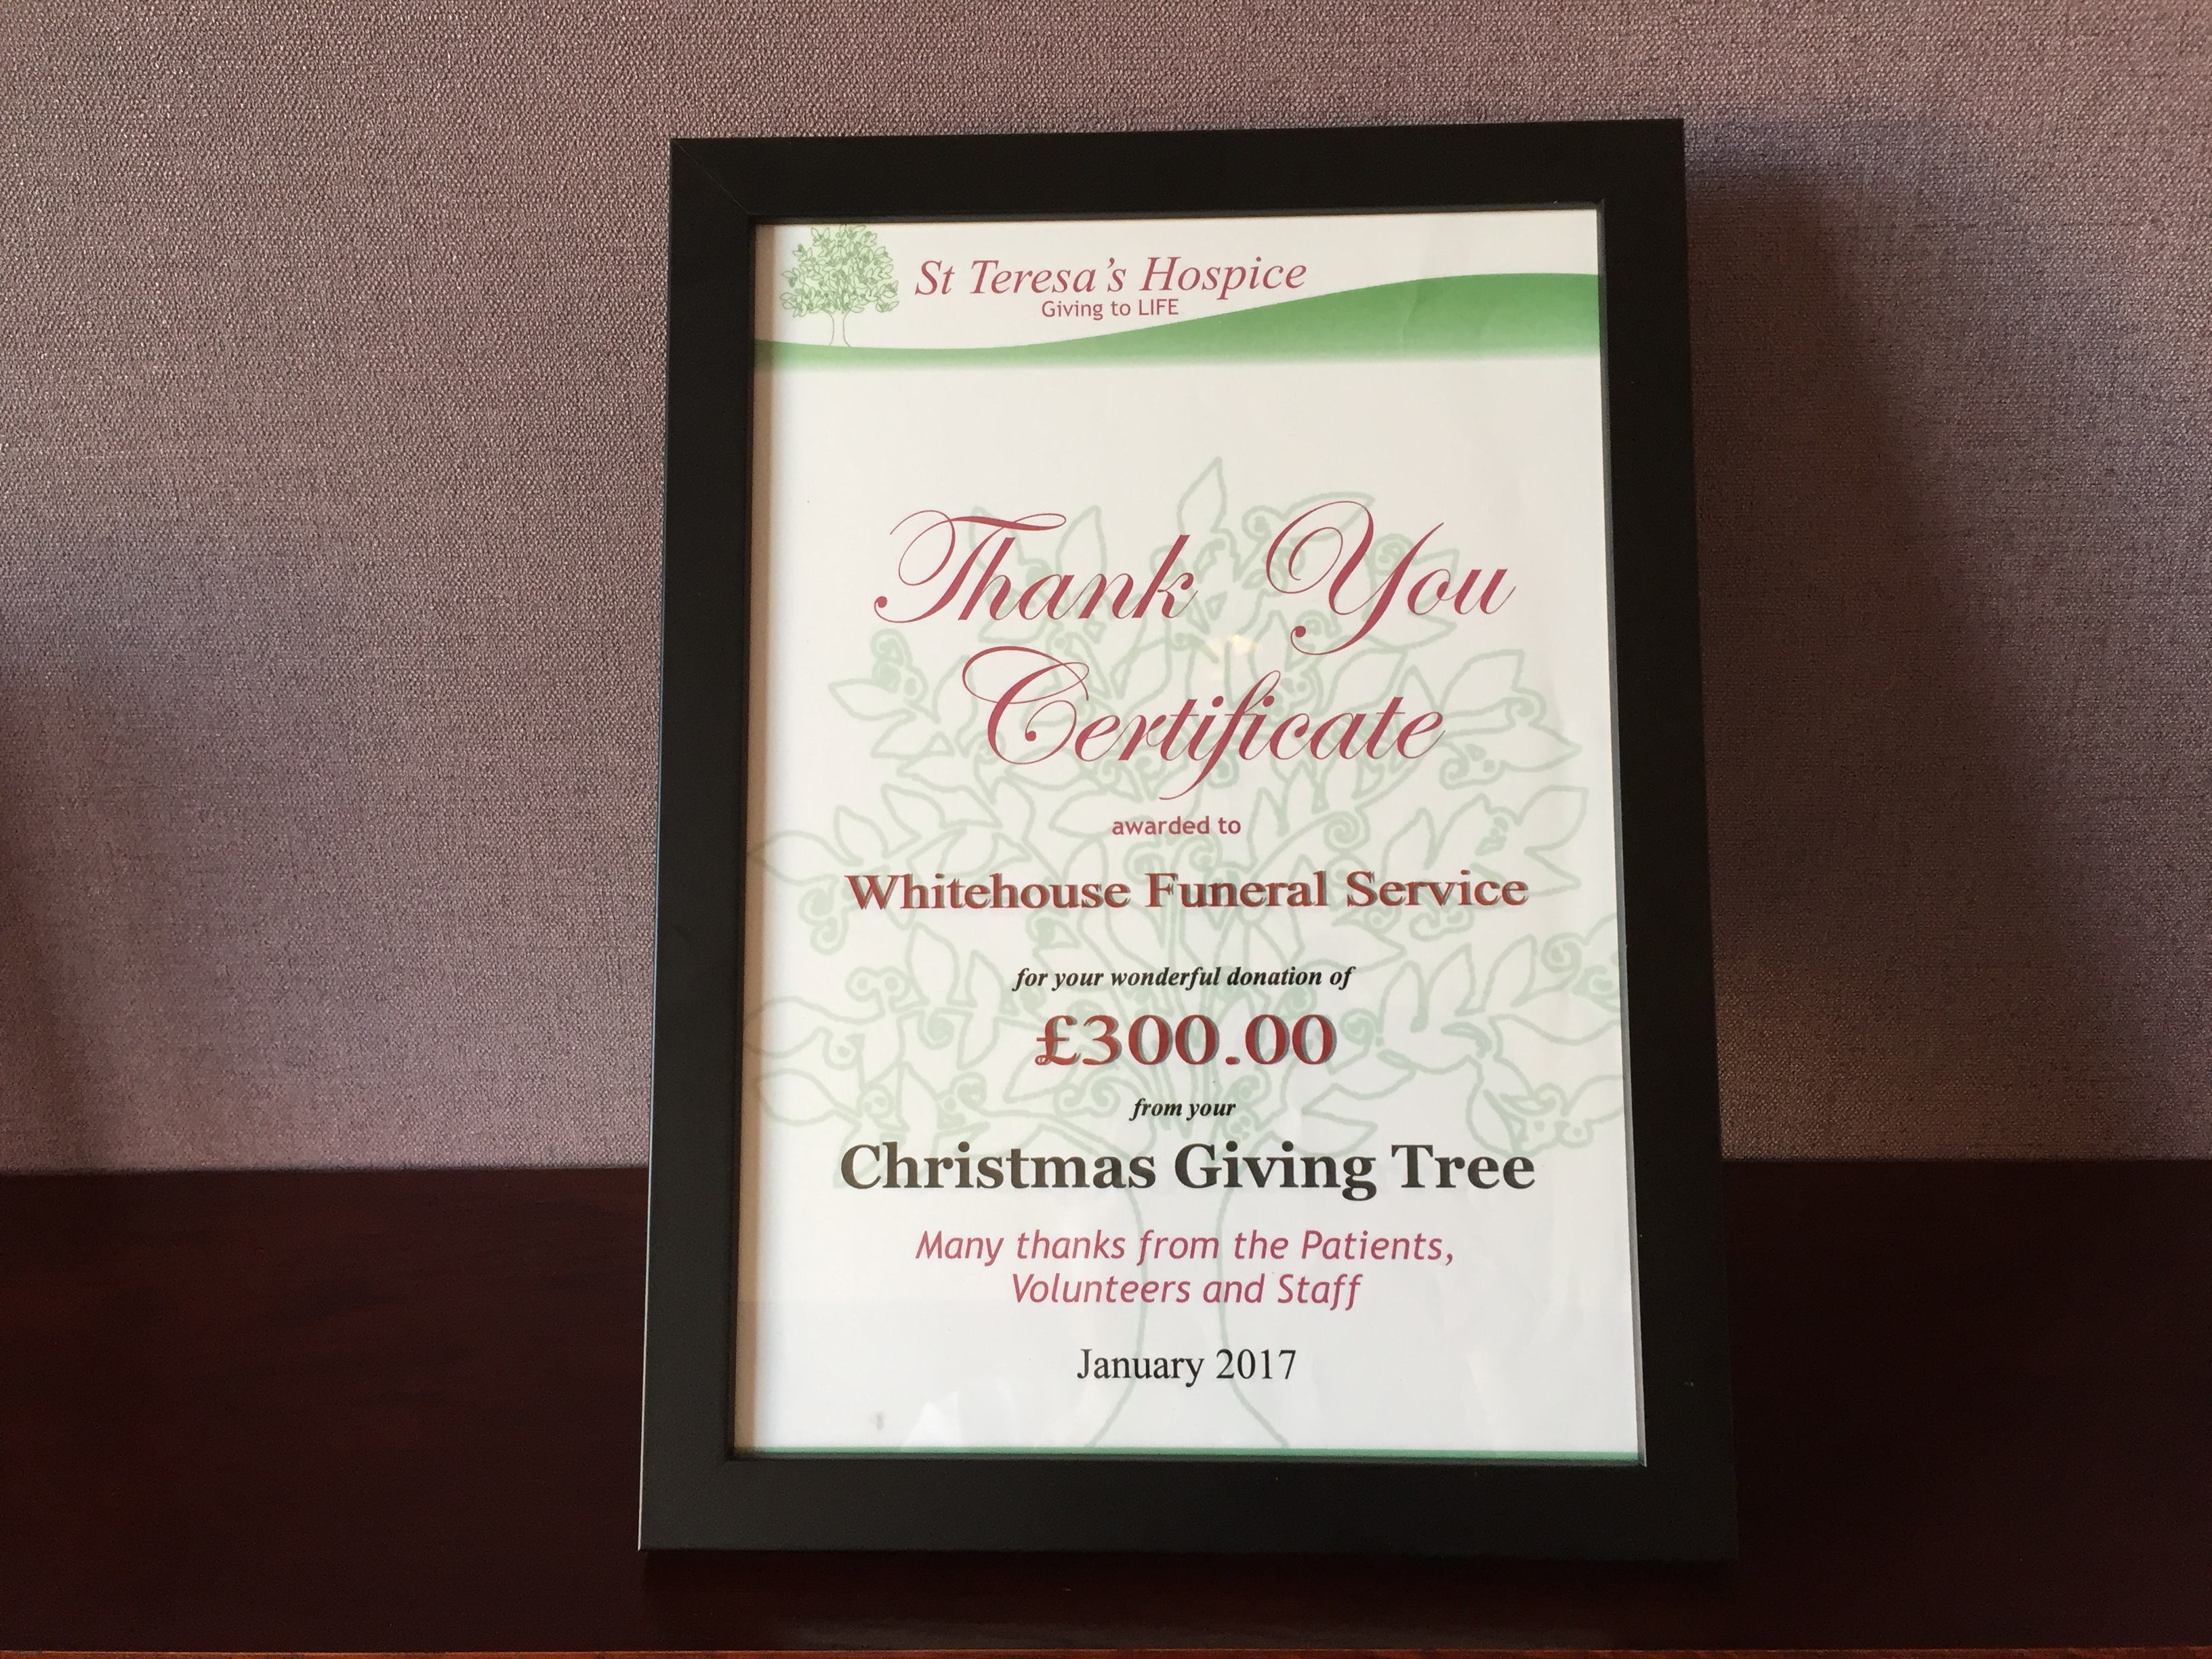 Thank you certificate from St Teresa's Hospice